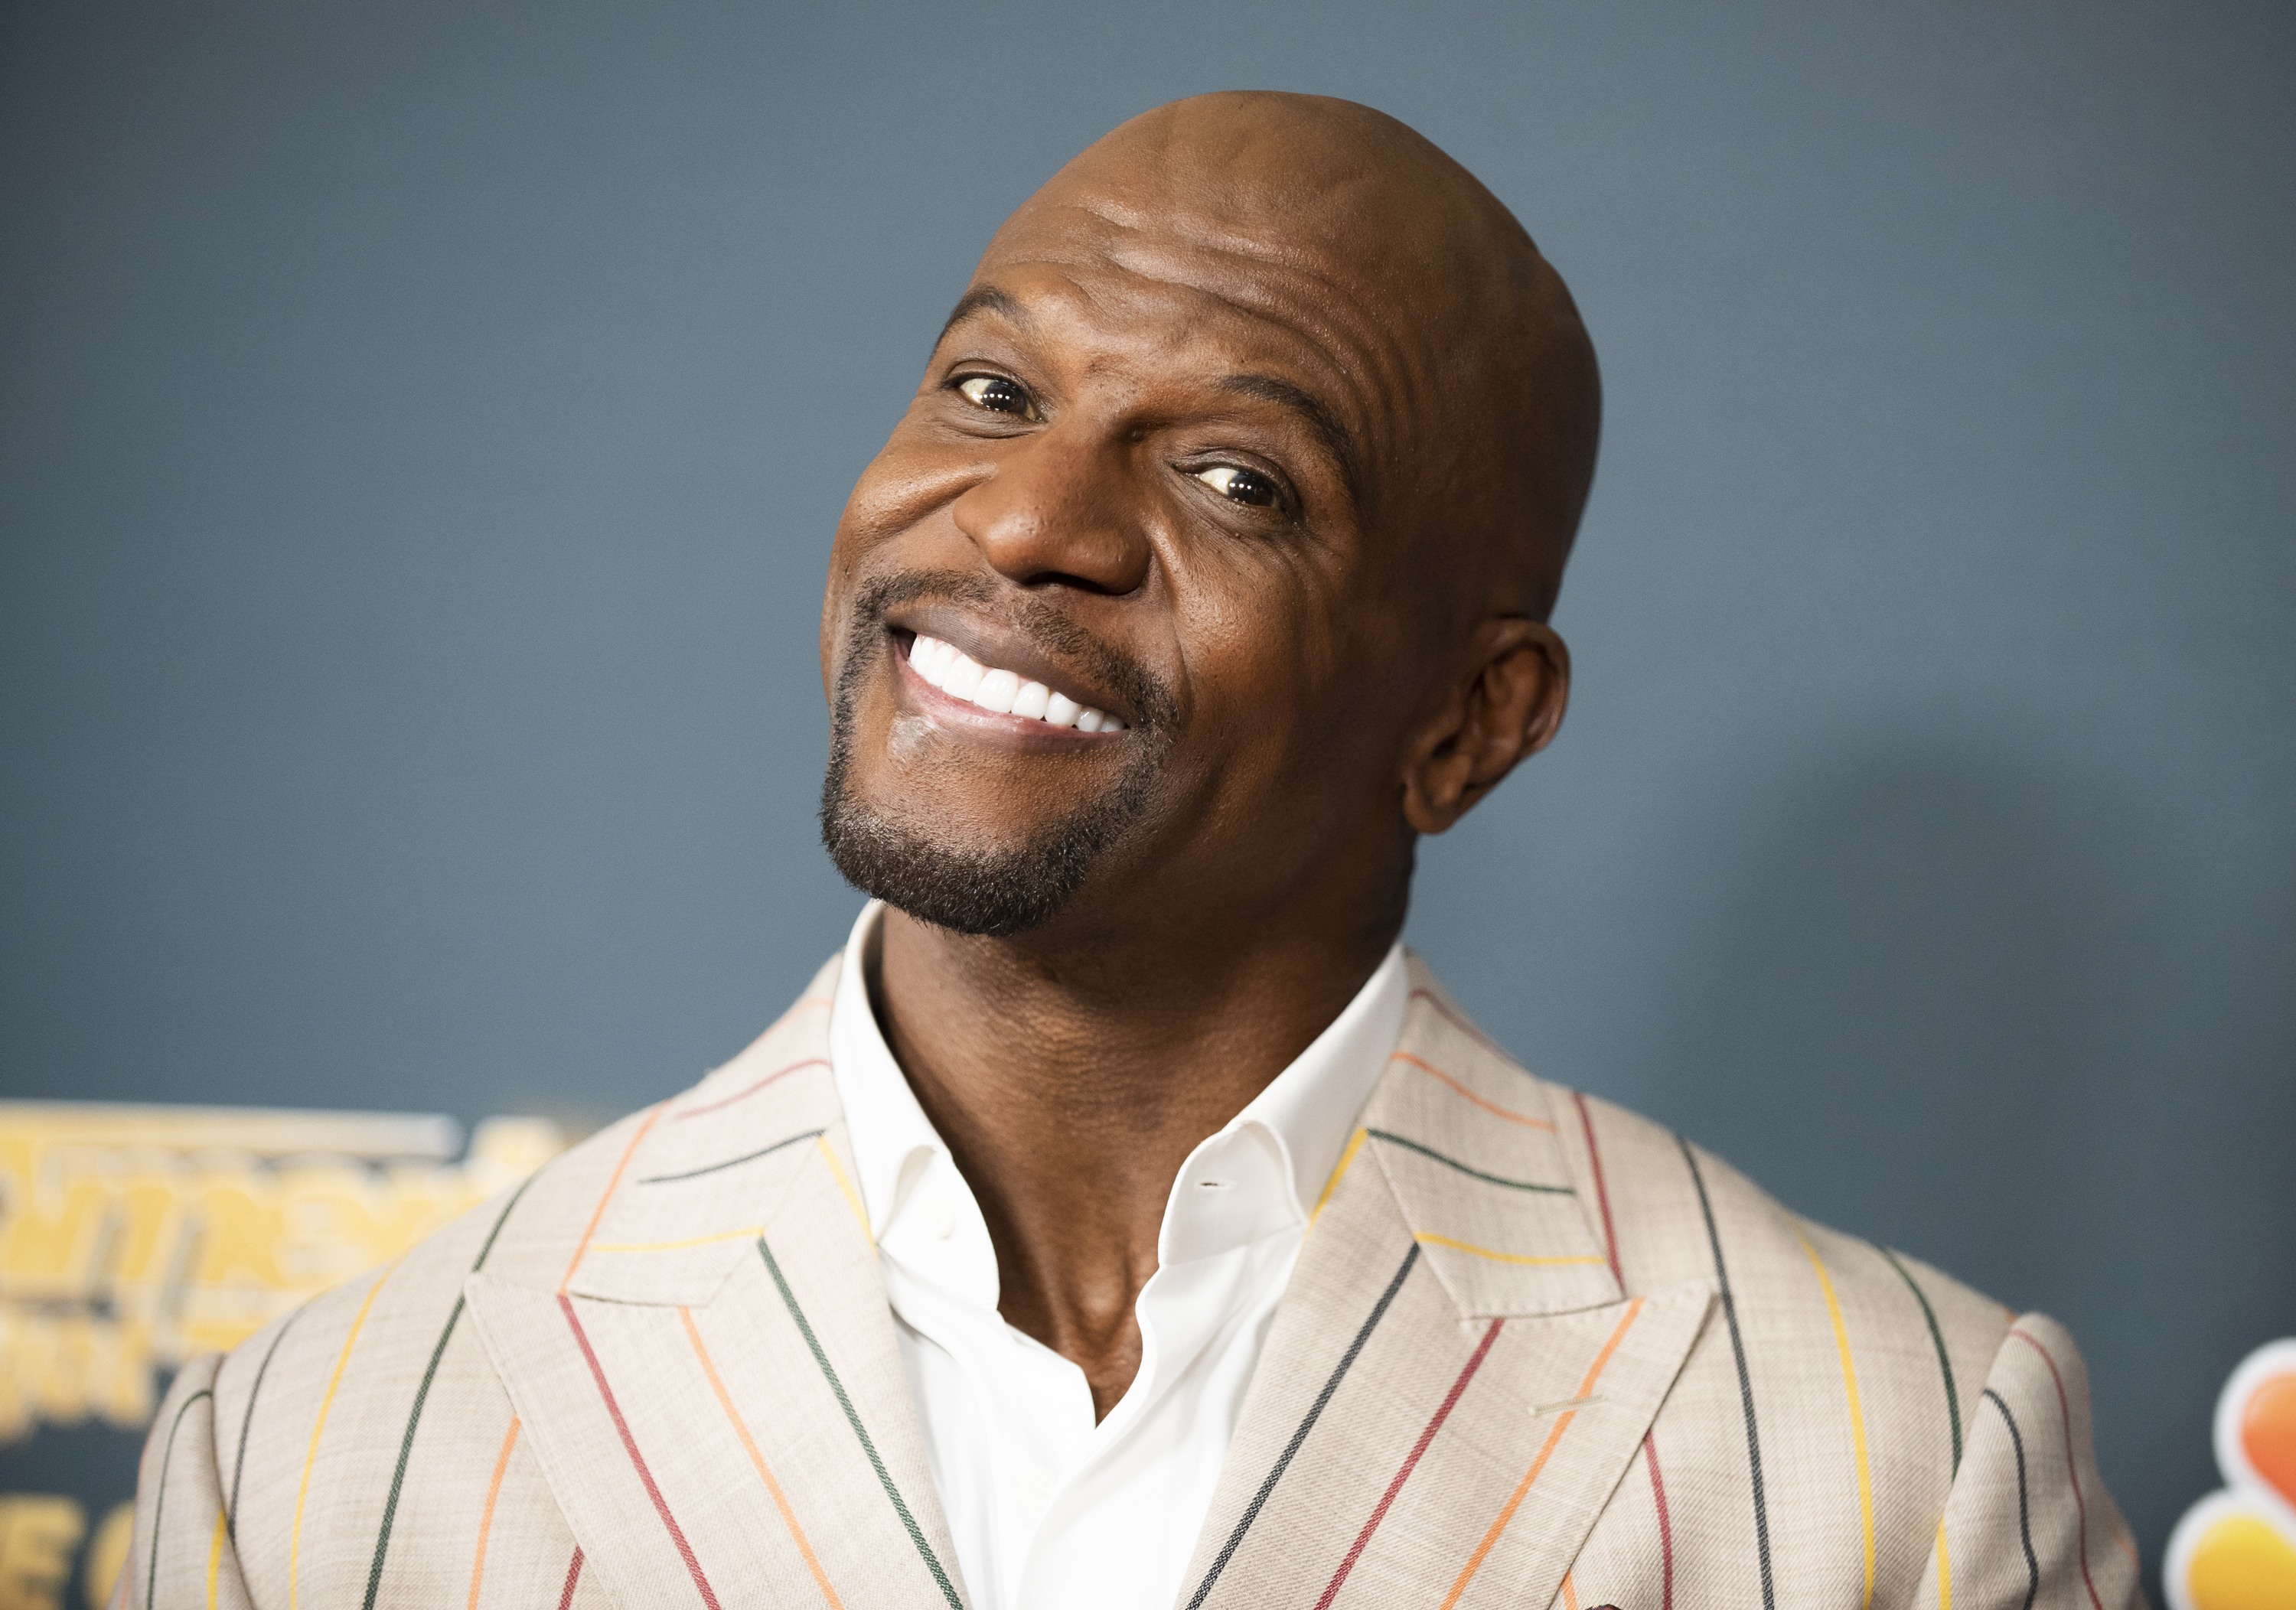 Terry Crews at the premiere of NBC's "America's Got Talent: The Champions" Season 2 on October 10, 2019 in Pasadena, California | Source: Getty Images